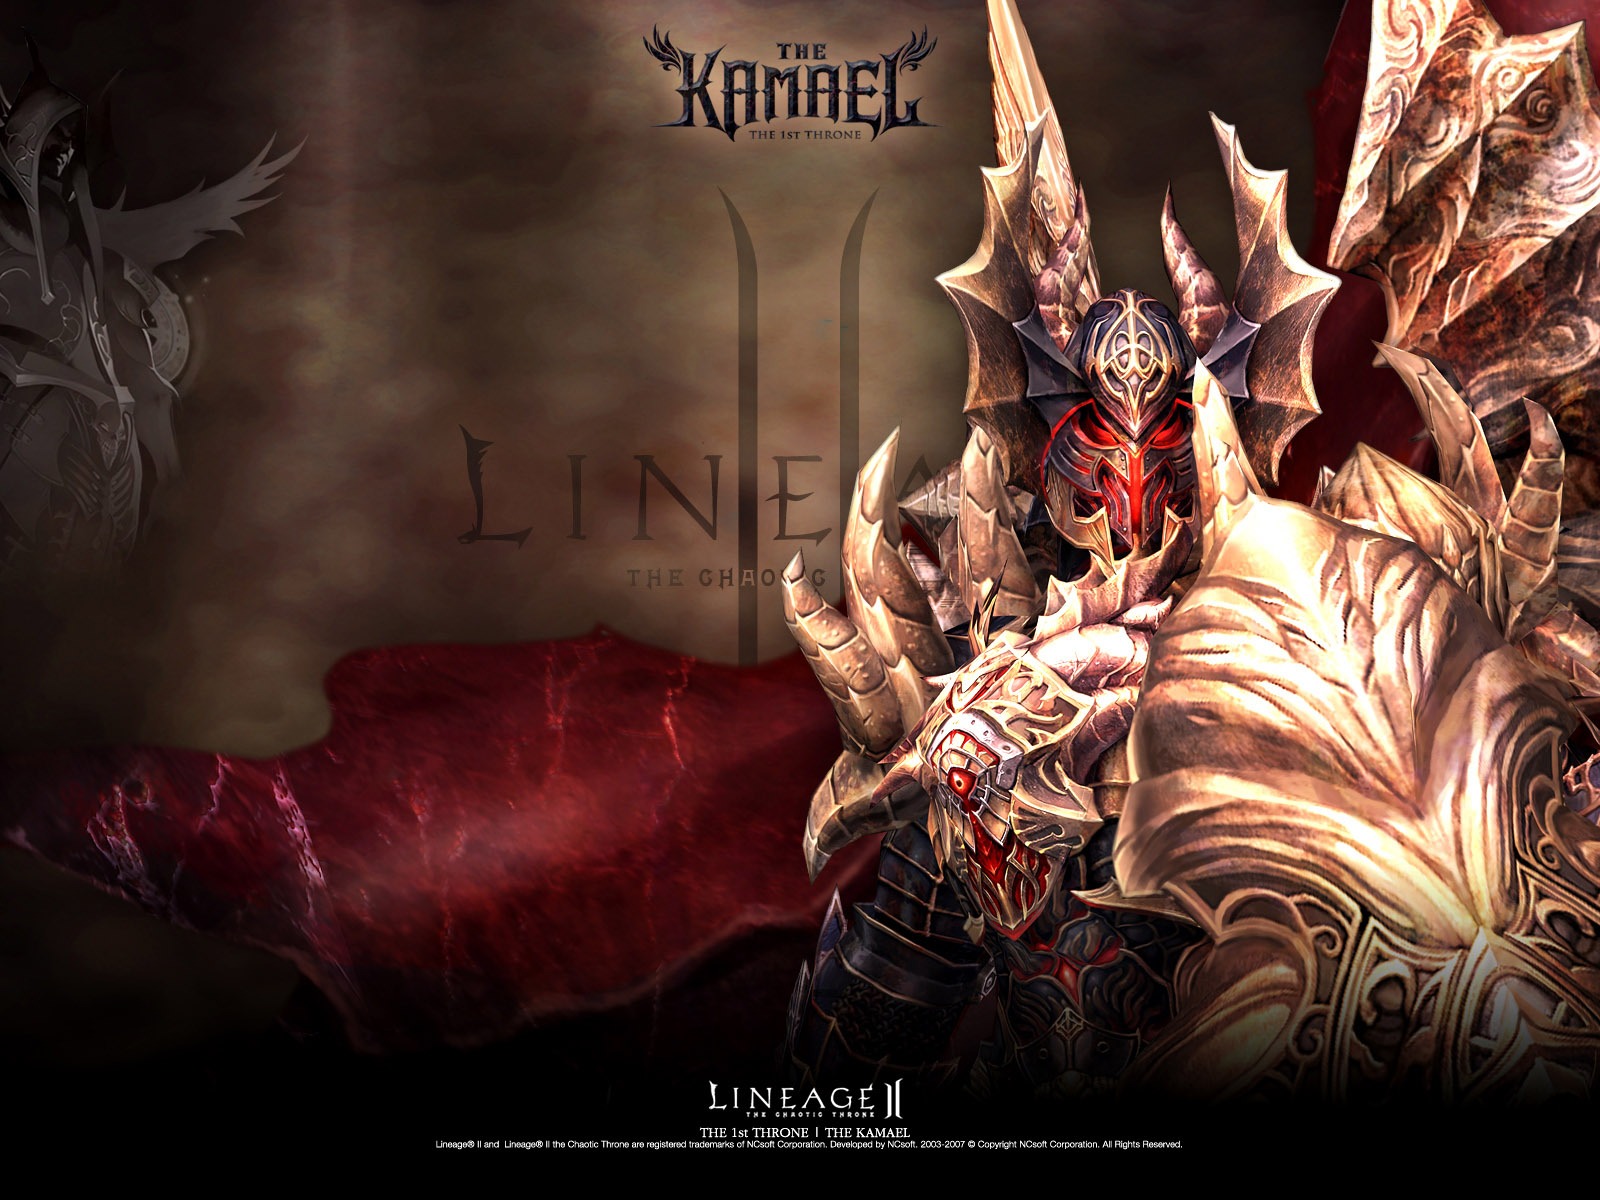 LINEAGE Ⅱ modeling HD gaming wallpapers #11 - 1600x1200